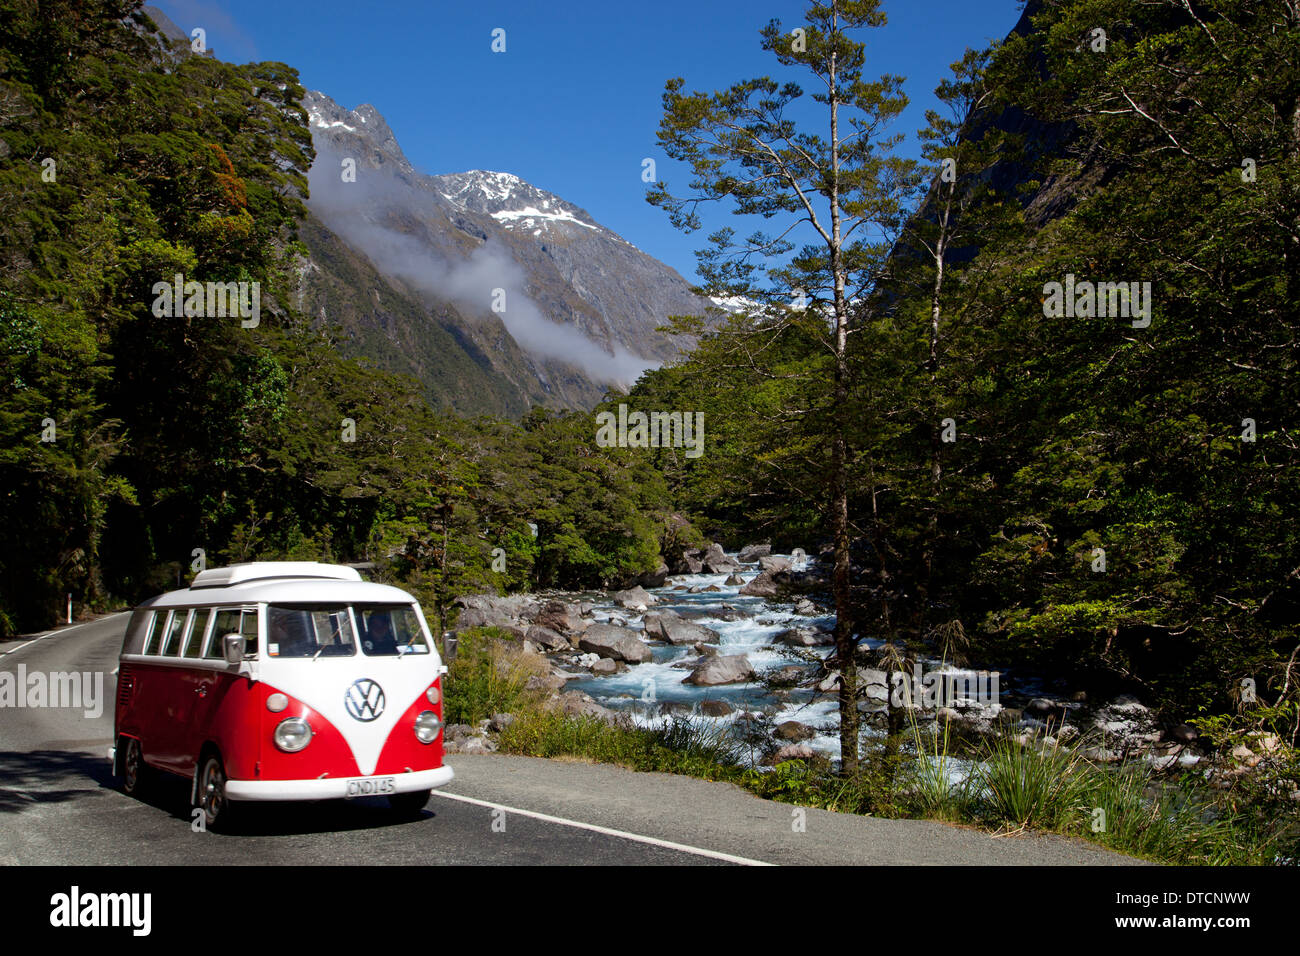 Camper van on road to Milford sound, Fiordland, South Island, New Zealand Stock Photo